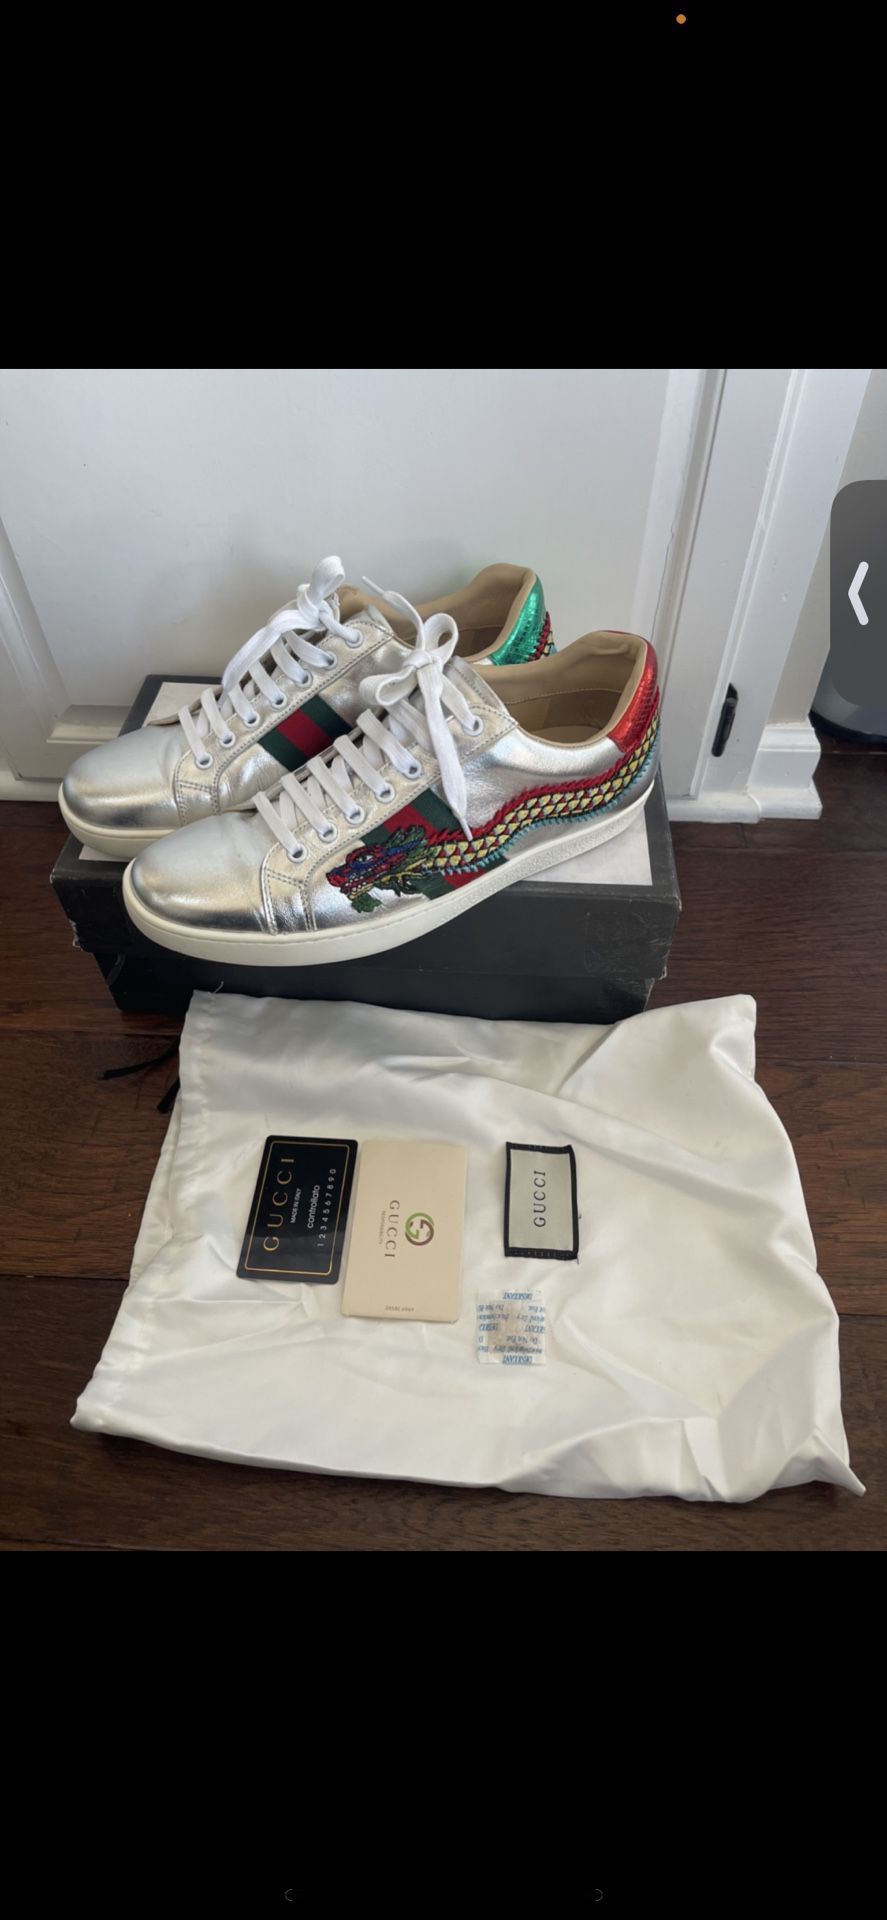 Authentic Gucci Metallic Silver Leather Web Ace Dragon Lace Up Sneakers 43 Size 9us for Sale in Arlington, TX - OfferUp